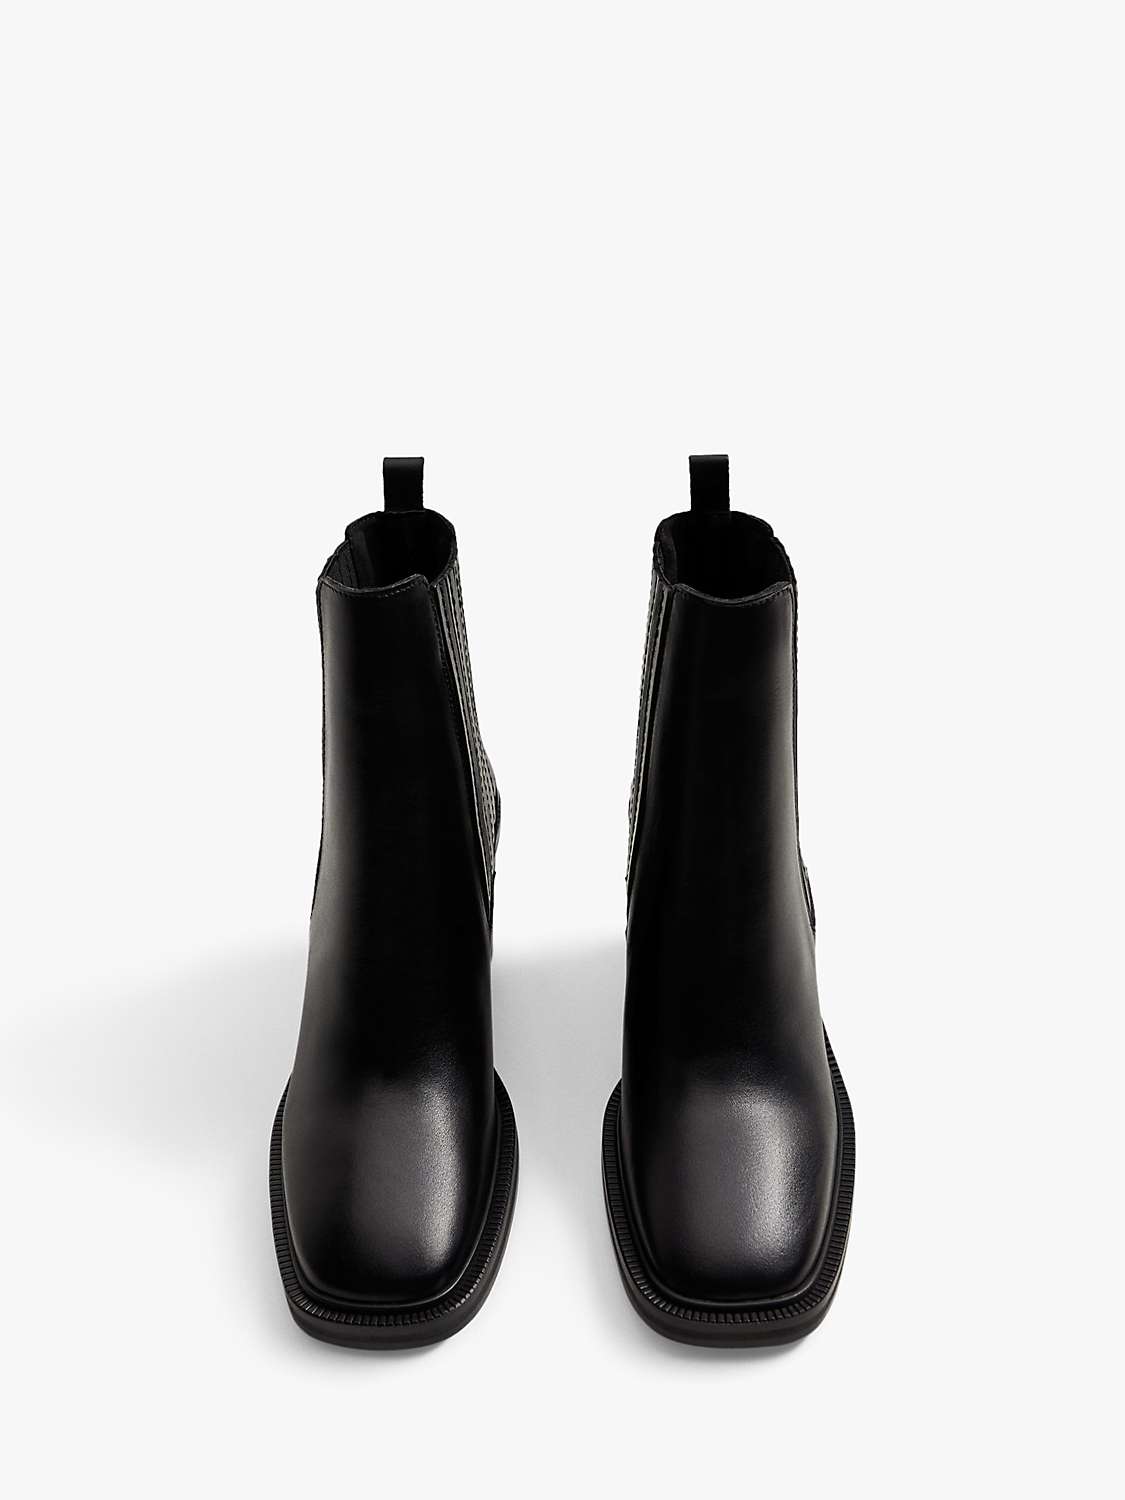 Mango Panelled Leather Ankle Boots, Black at John Lewis & Partners